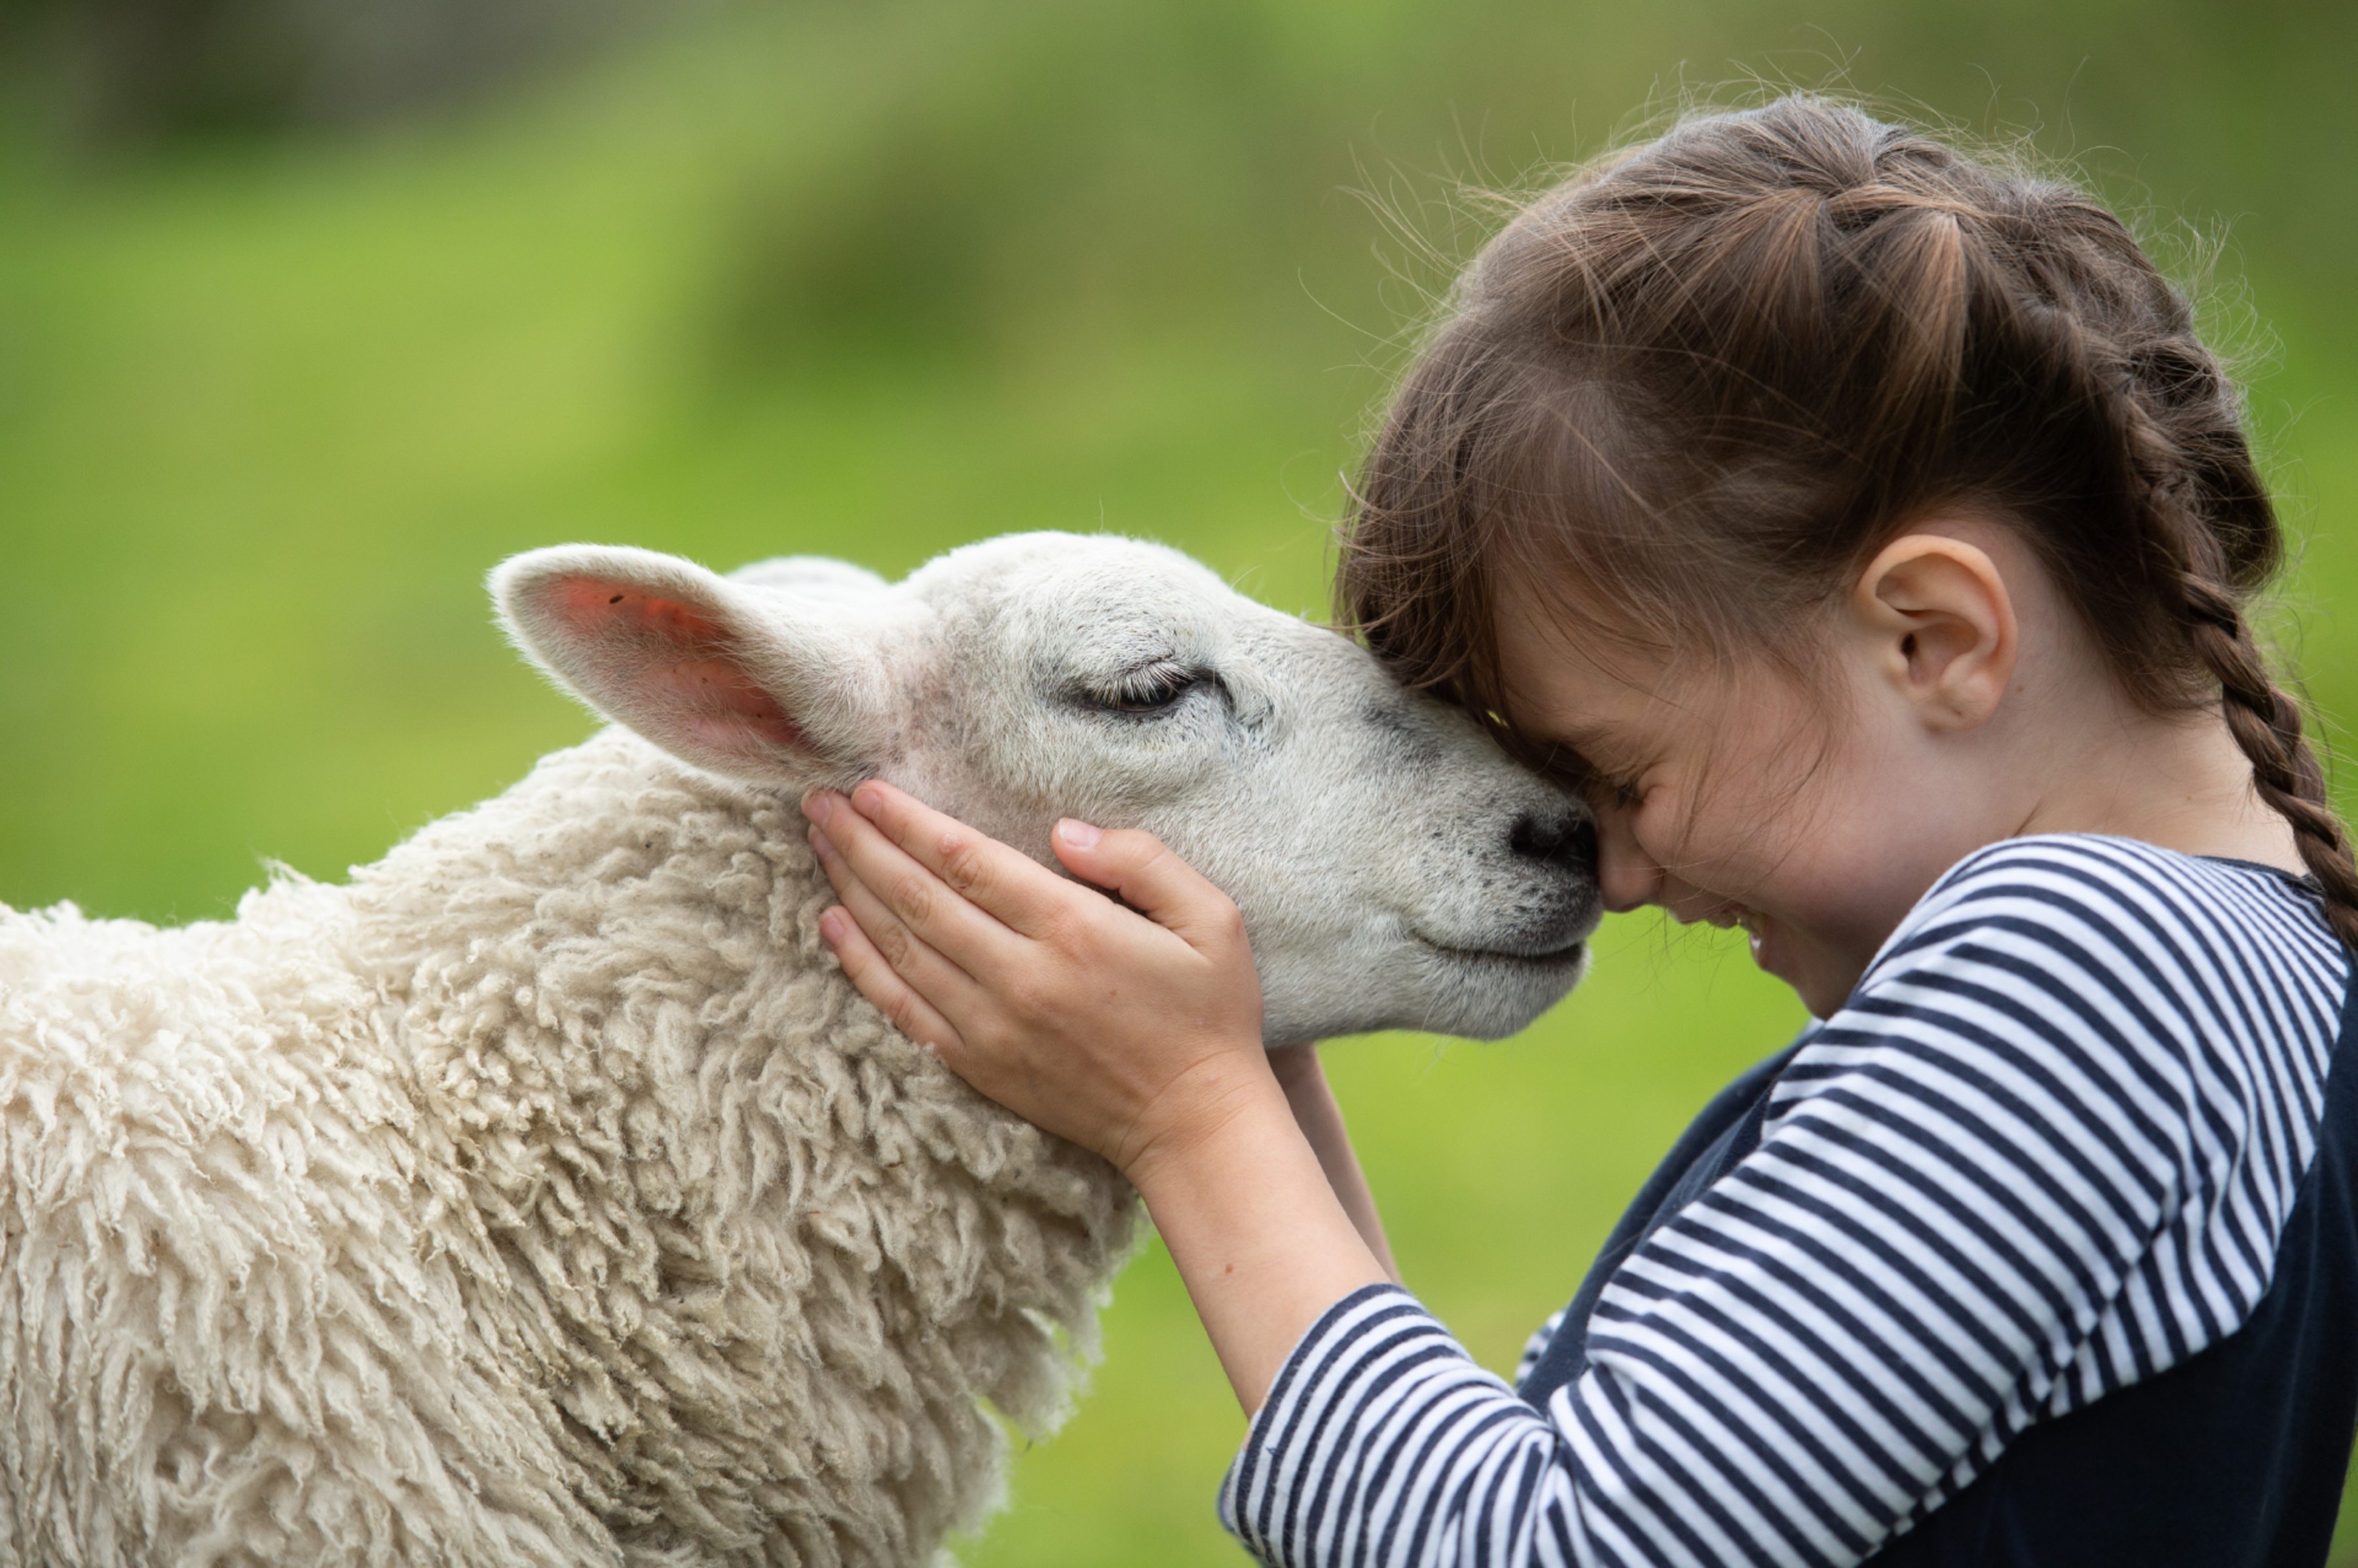 Ailish Martin, 9 is so happy to see Effie the sheep again.
Pictures by JASON HEDGES